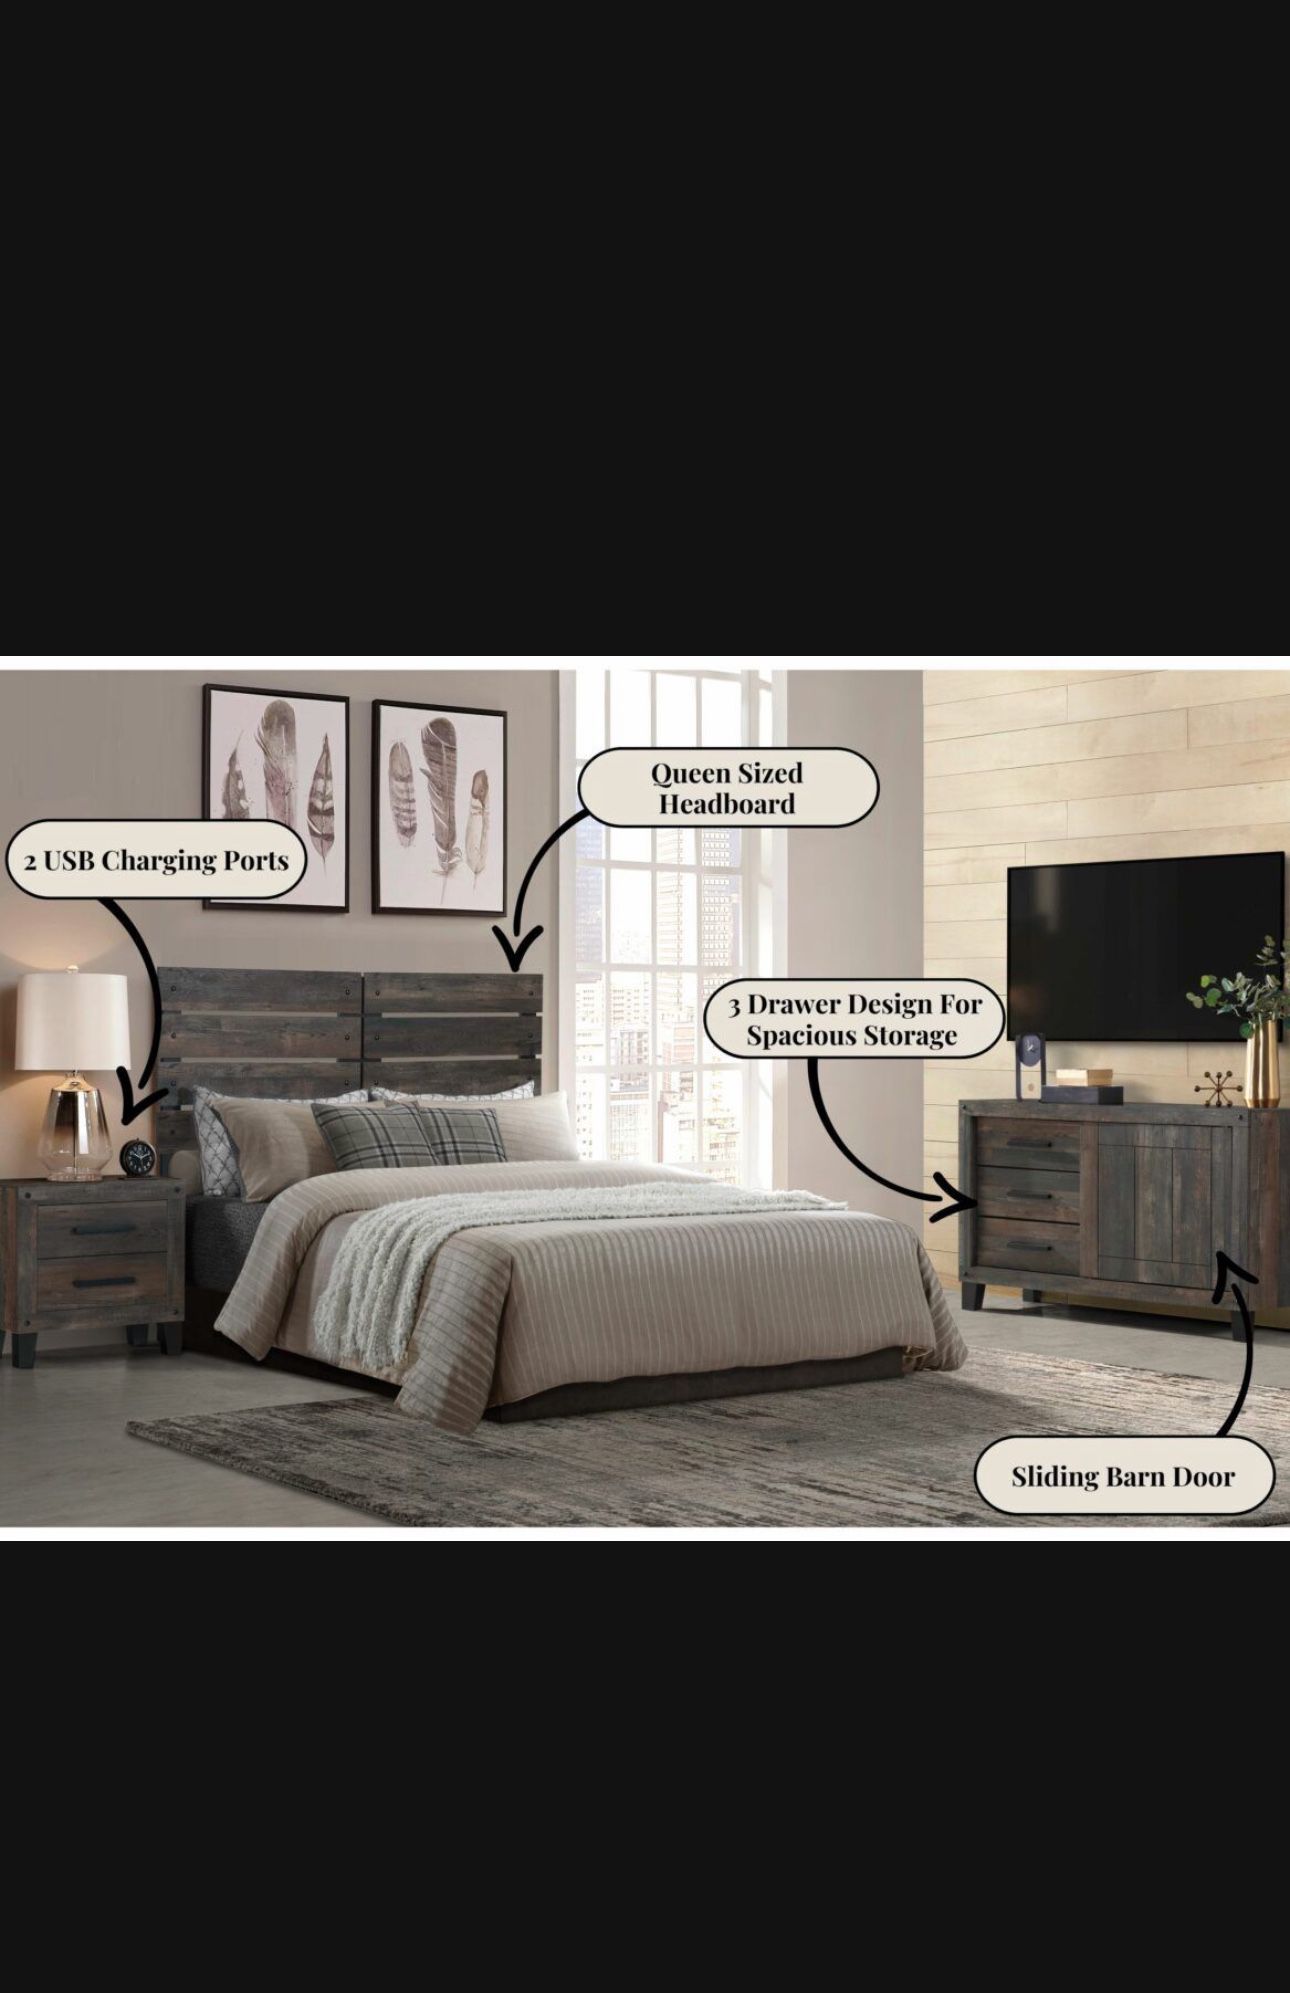 Brand New Complete Bedroom Set With FREE Orthopedic Mattress For $599